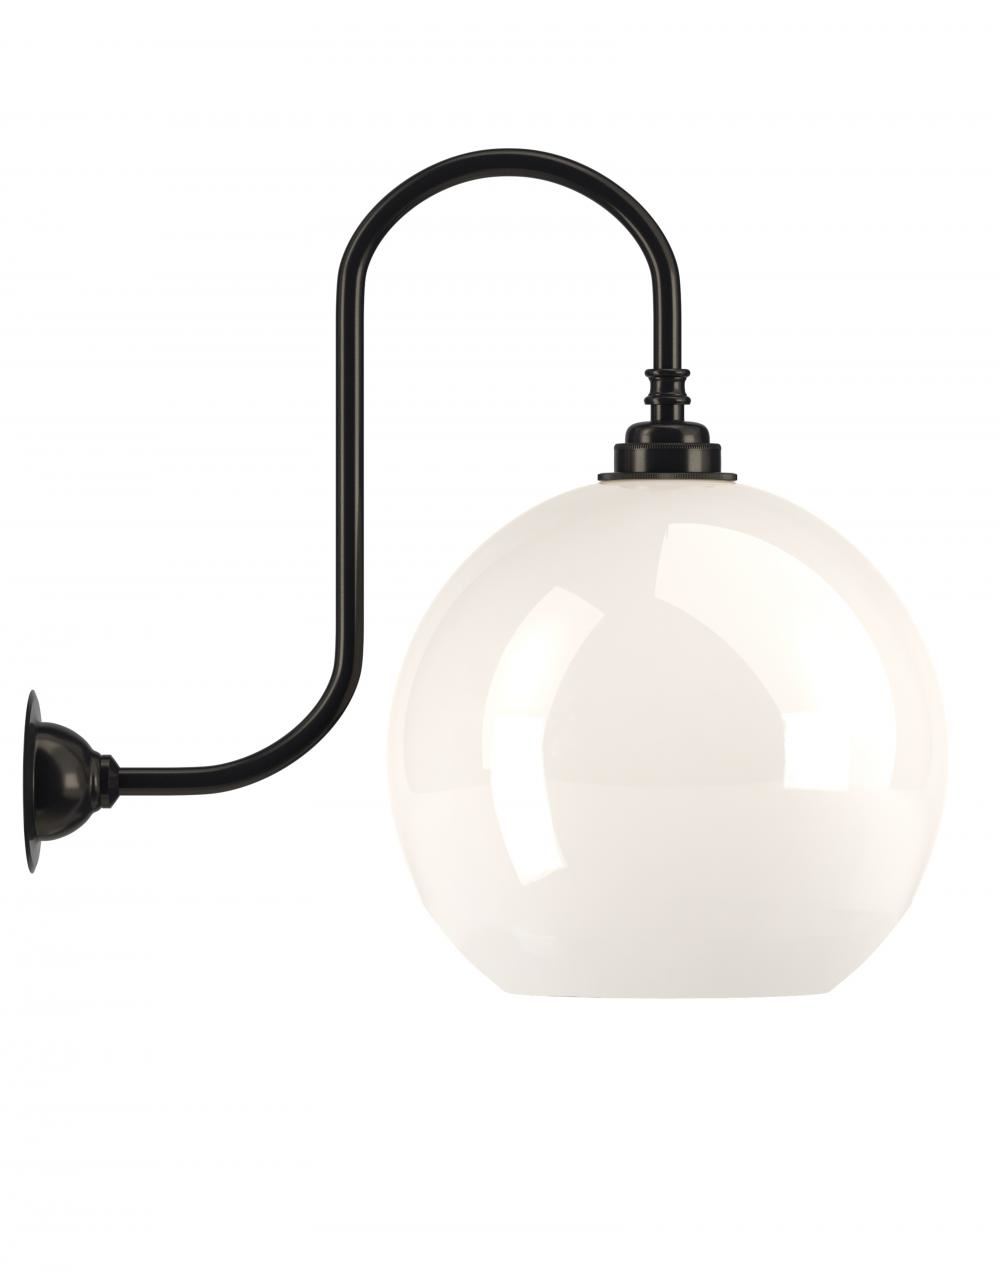 Hereford Swan Neck Wall Light Large White Bronze